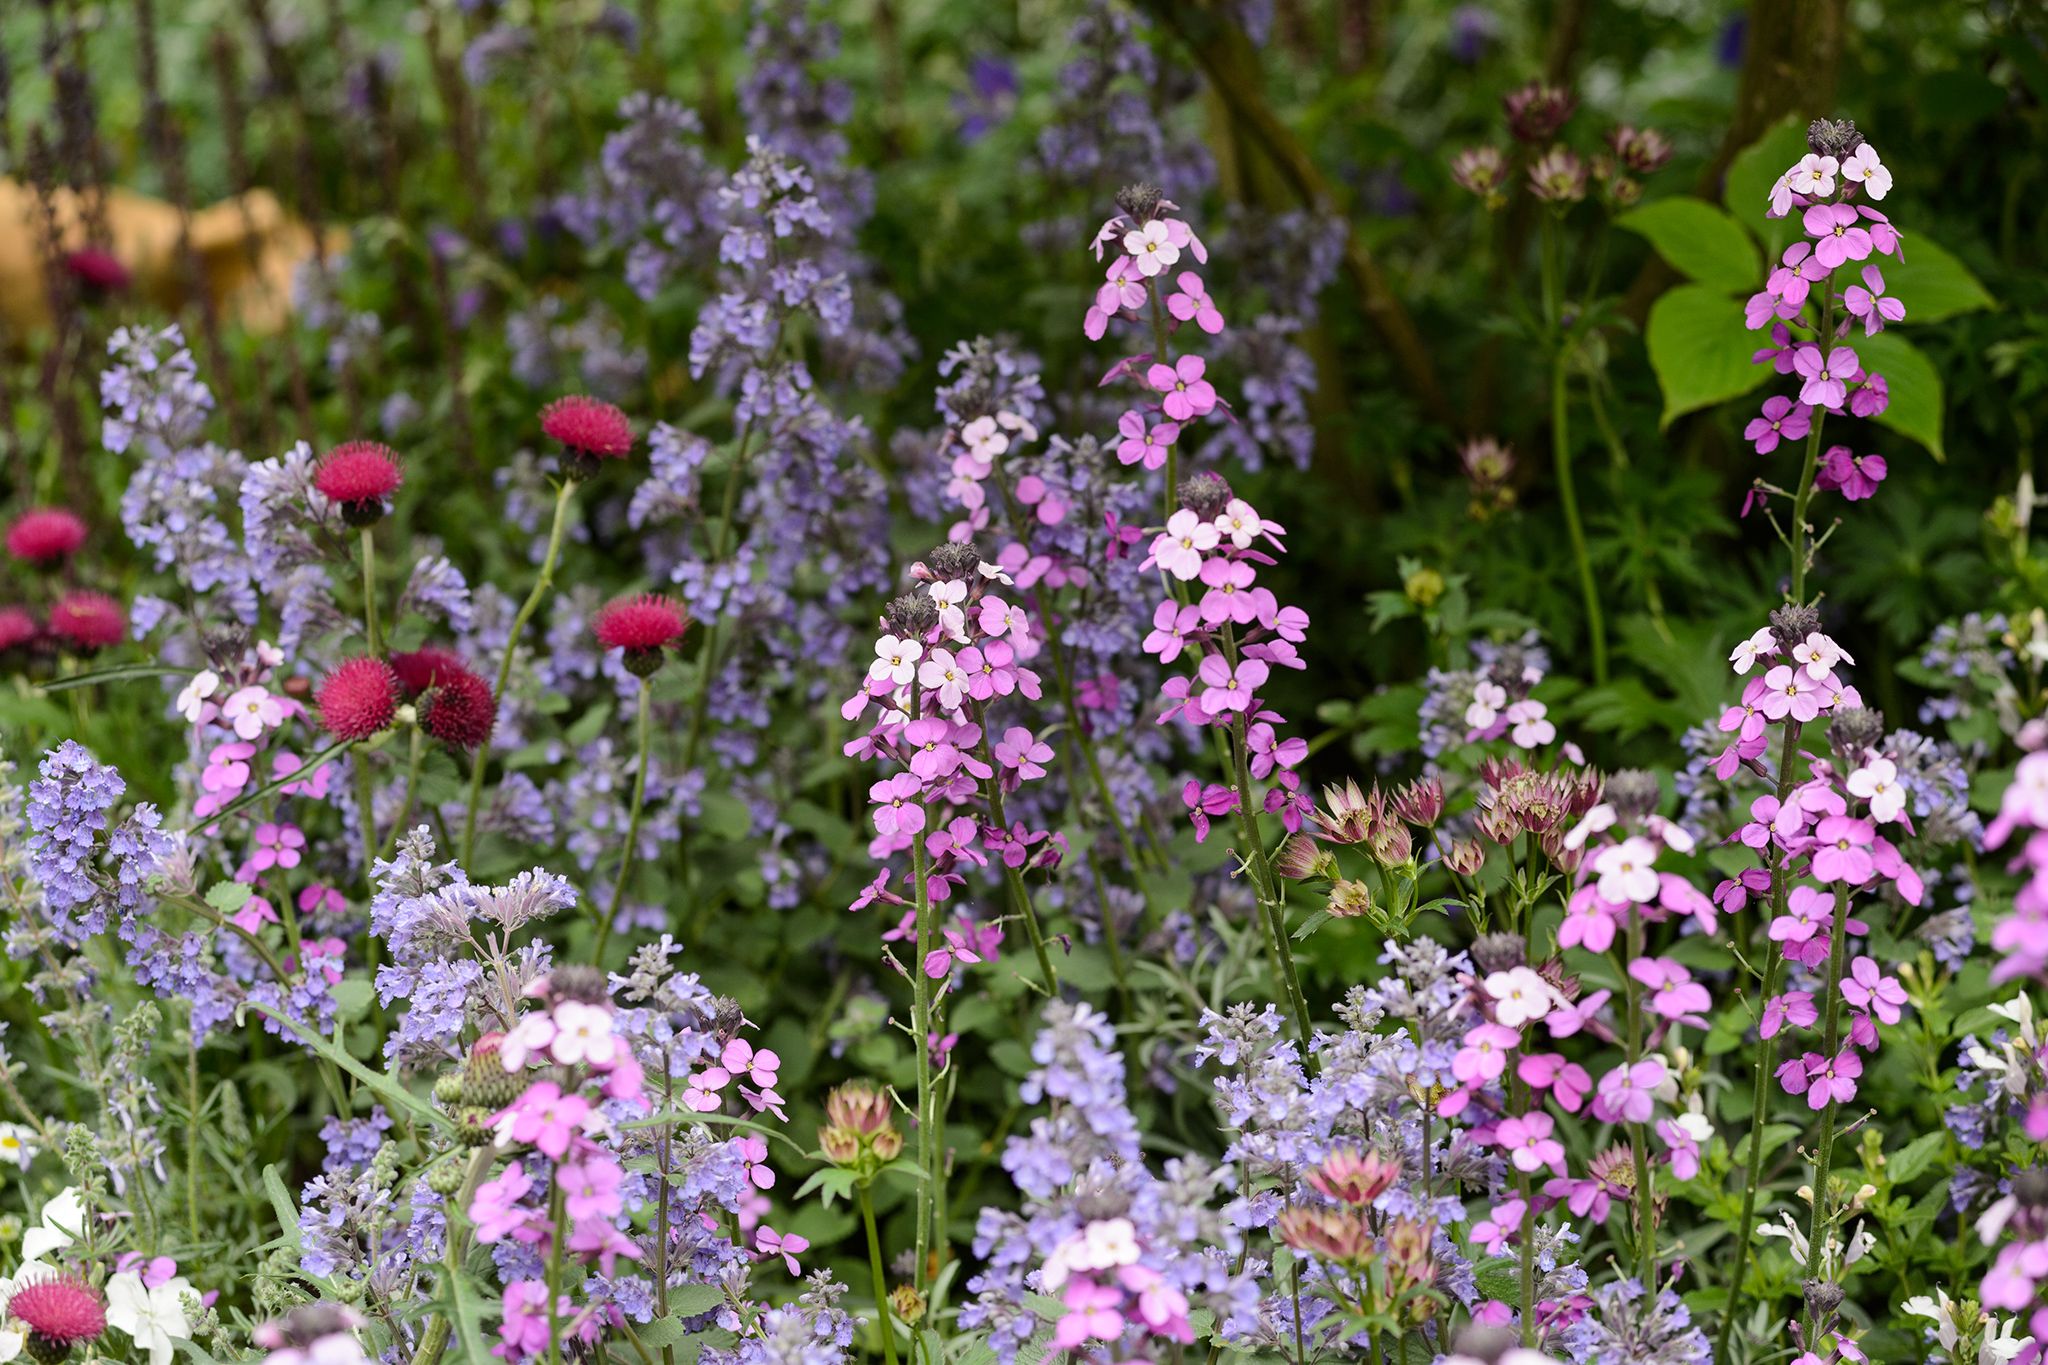 The most beautiful yearbooks for a
cottage garden